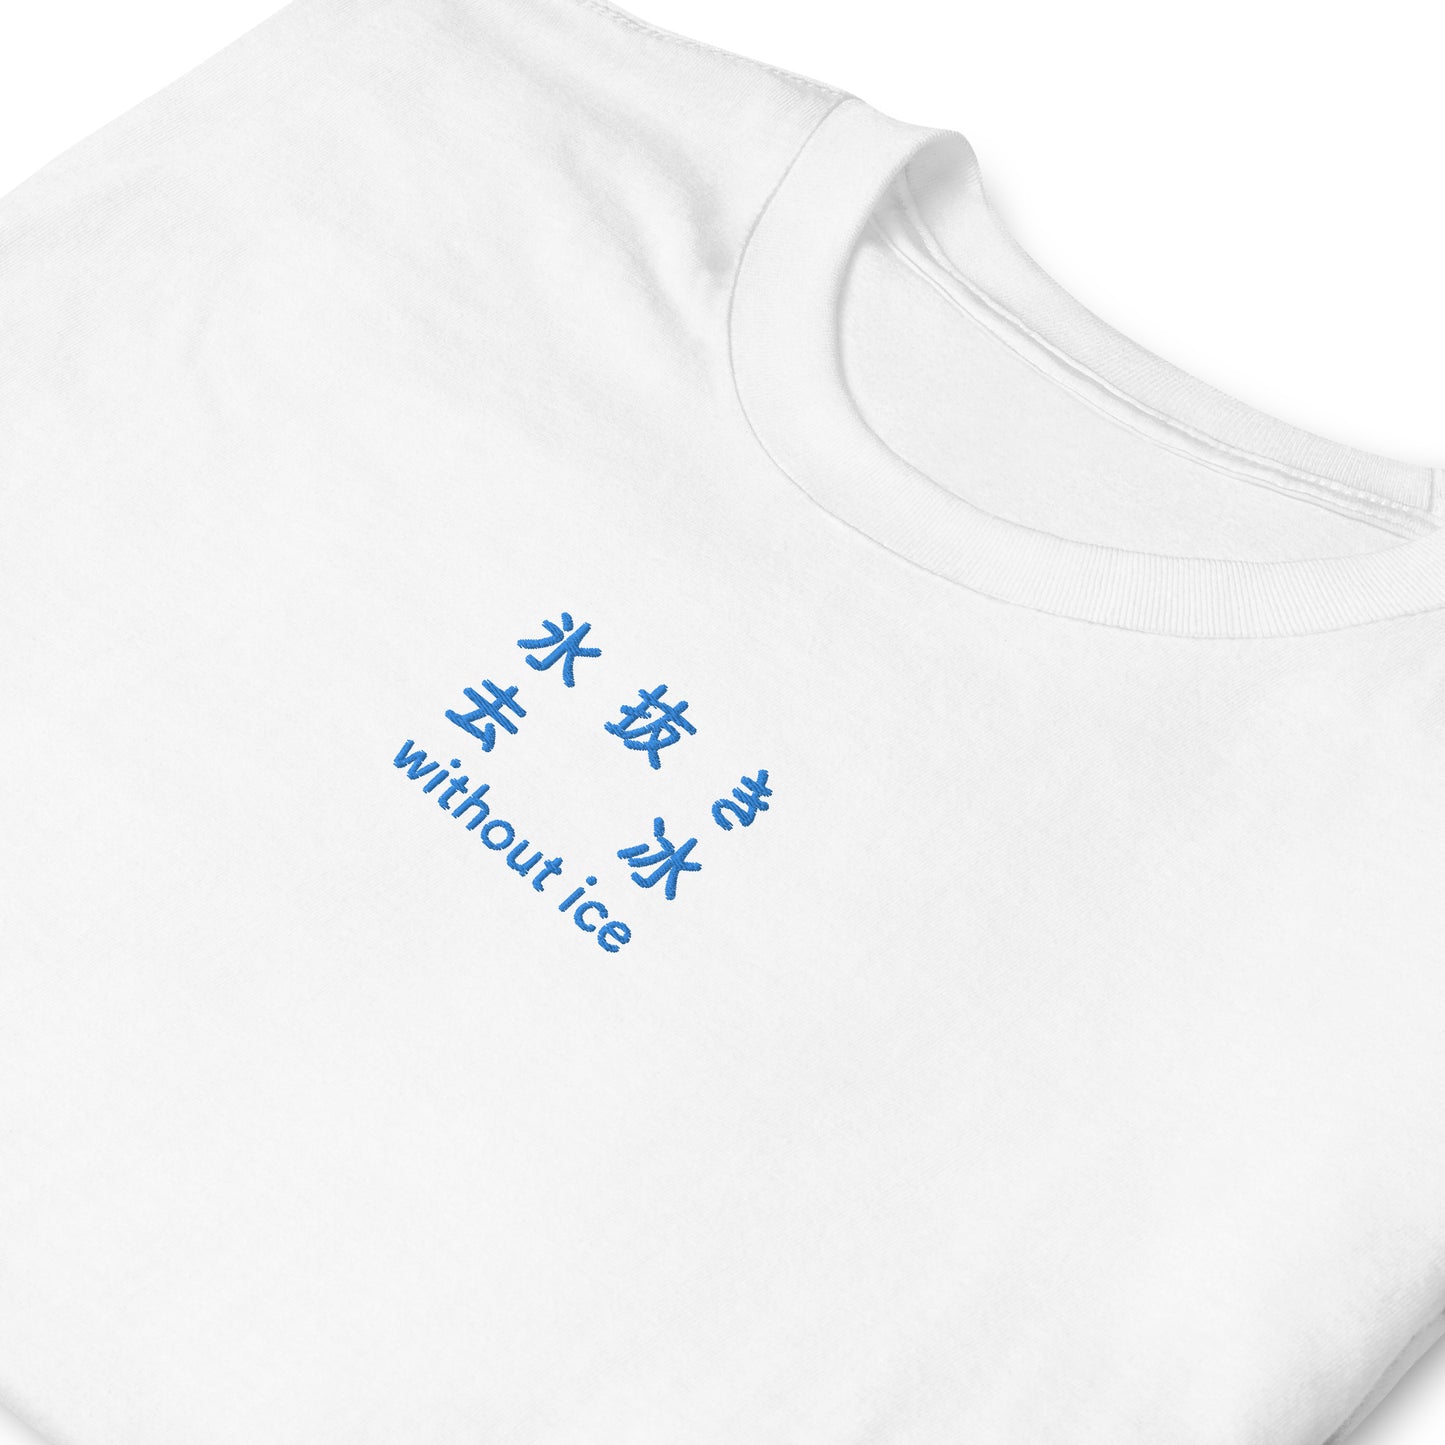 White High Quality Tee - Front Design with an Blue Embroidery "Without Ice" in Japanese,Chinese and English